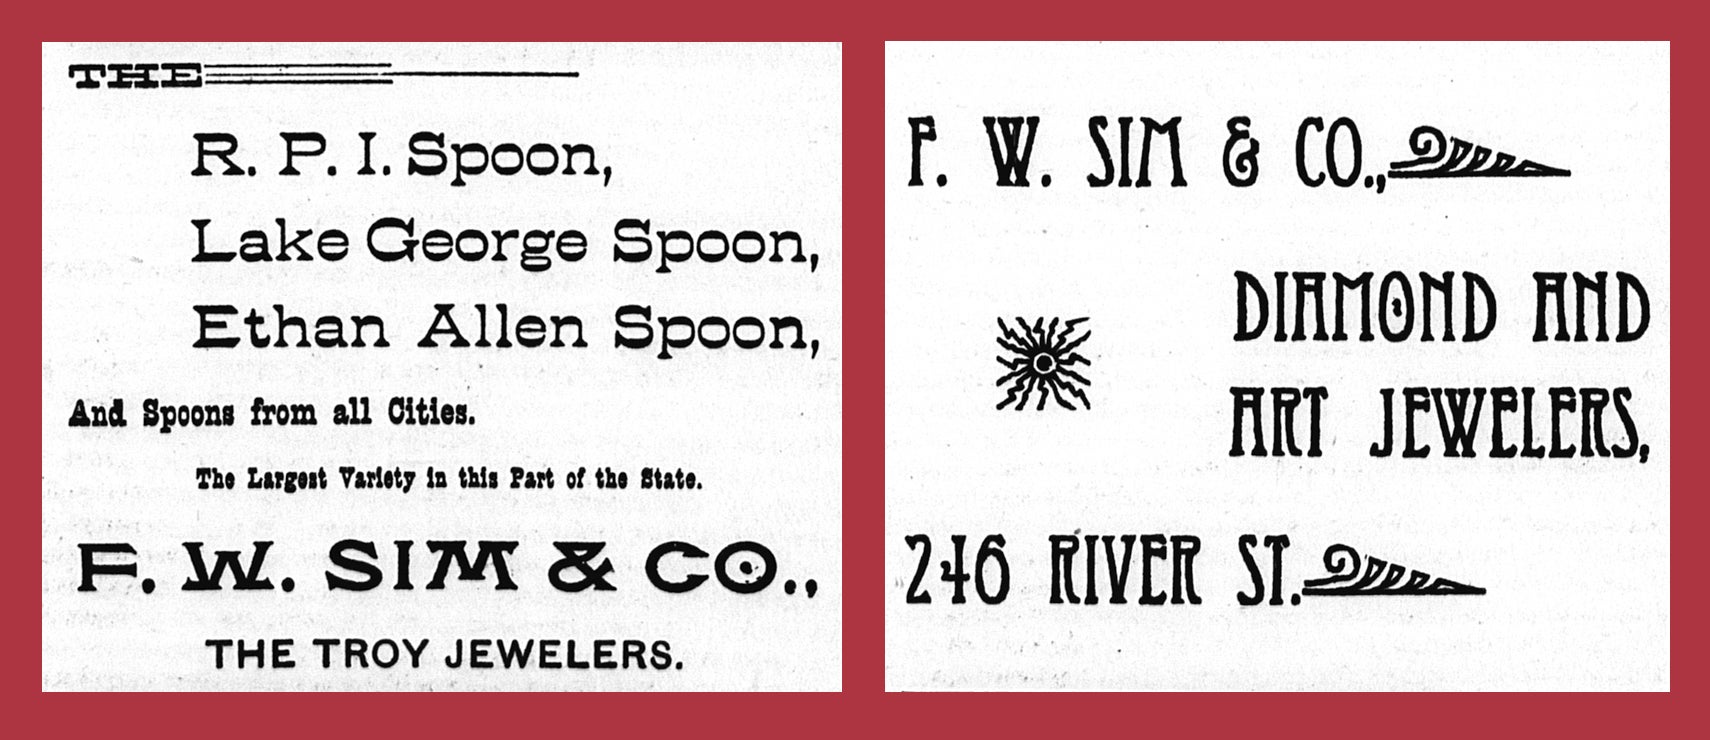 F. W. Sim & Co. ads in the Polytechnic, June 22 and September 30, 1893